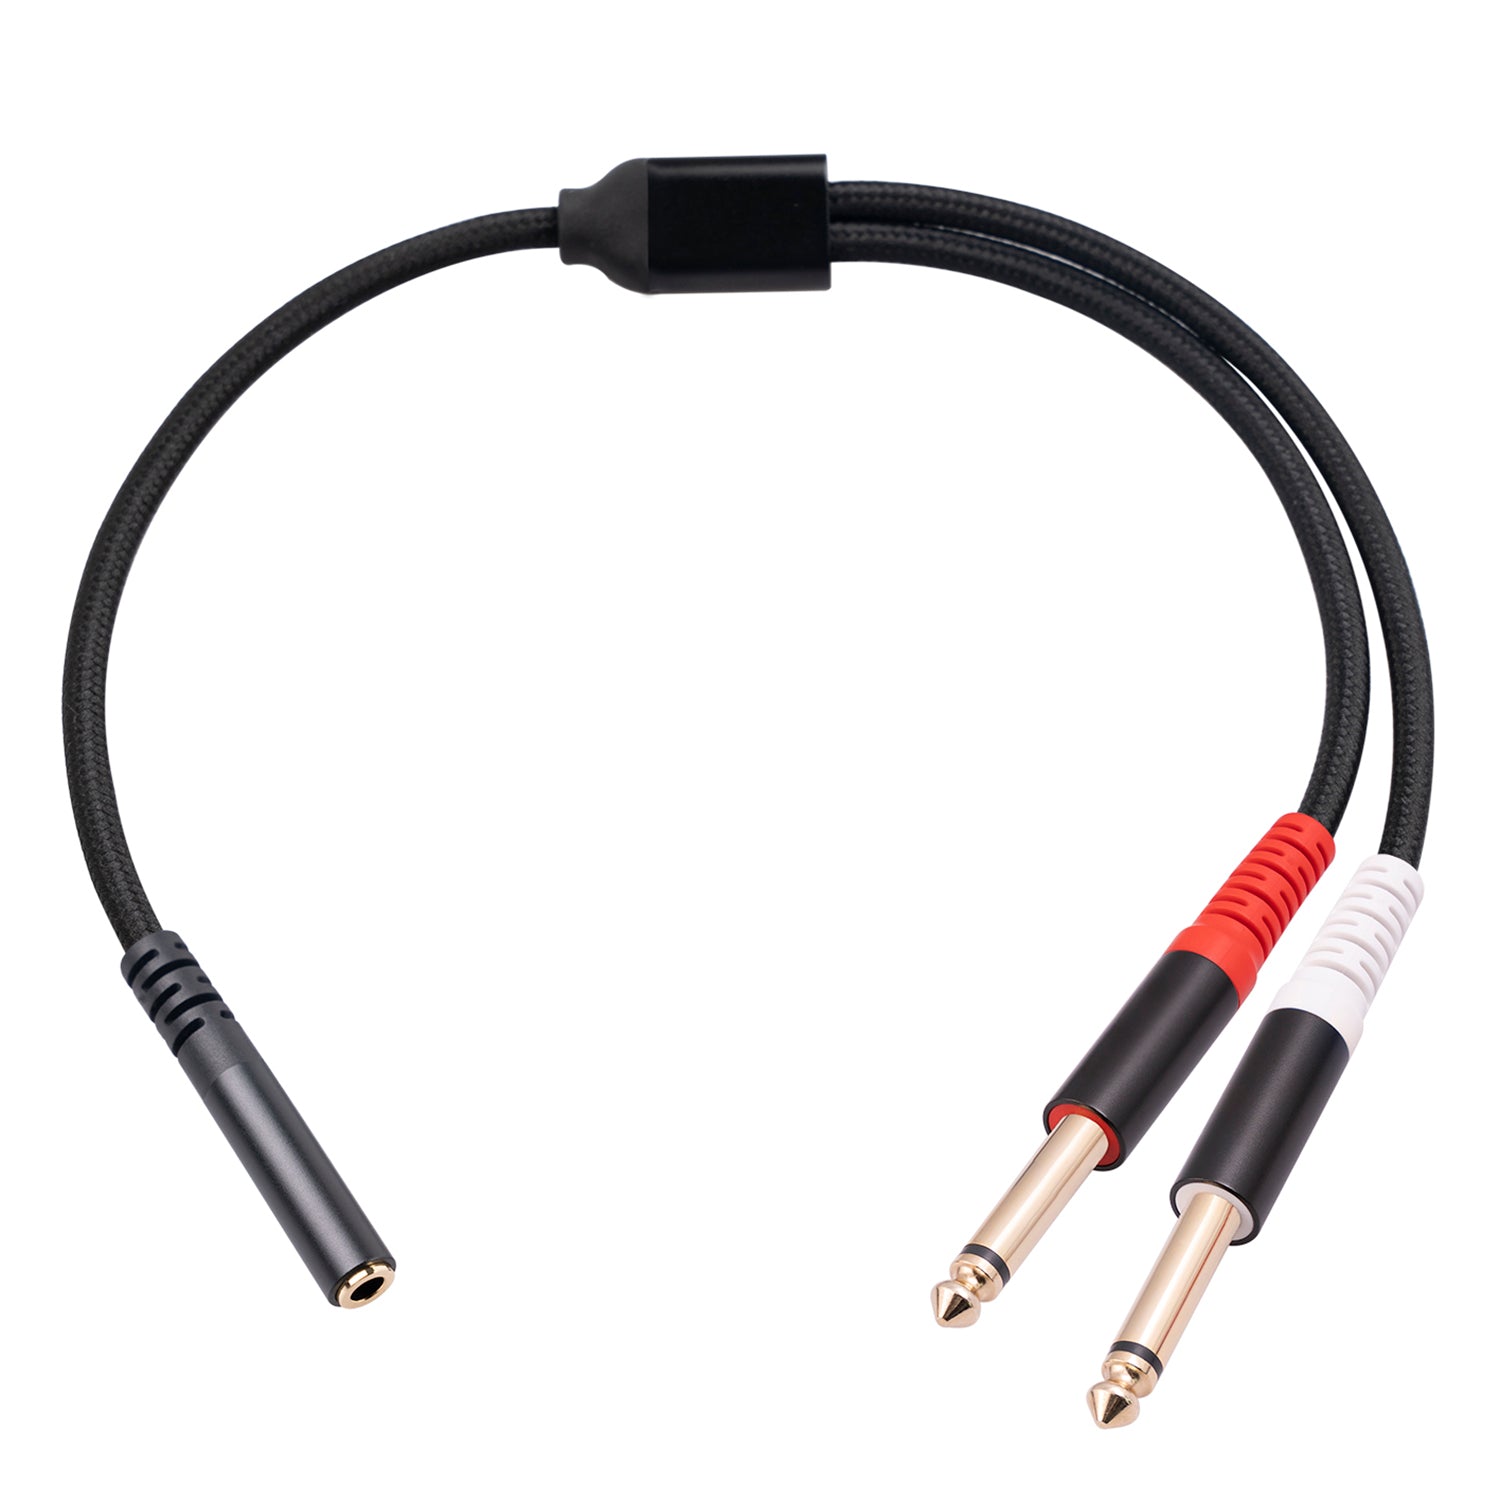 3717 0.3m 3.5mm Female to 2x 6.35mm 1 / 4 inch TS Mono Male Jack Audio Adapter Cable